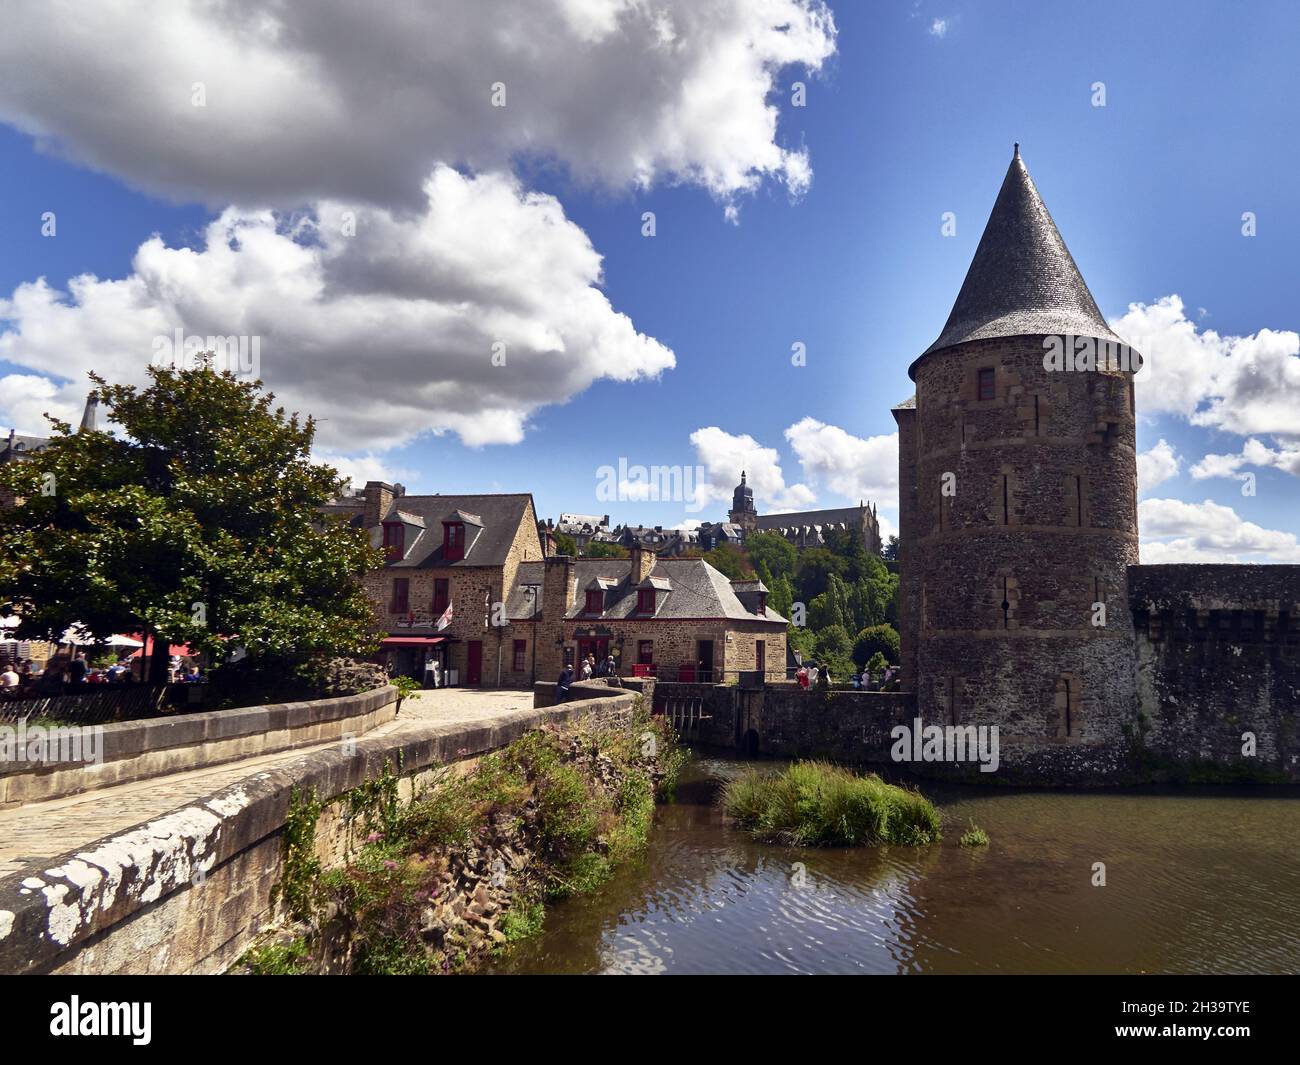 Fougeres, France. Ille-et-Vilaine department, Brittany France.  The defensive castle first built in the 11th century and surrounded by a moat fed by t Stock Photo